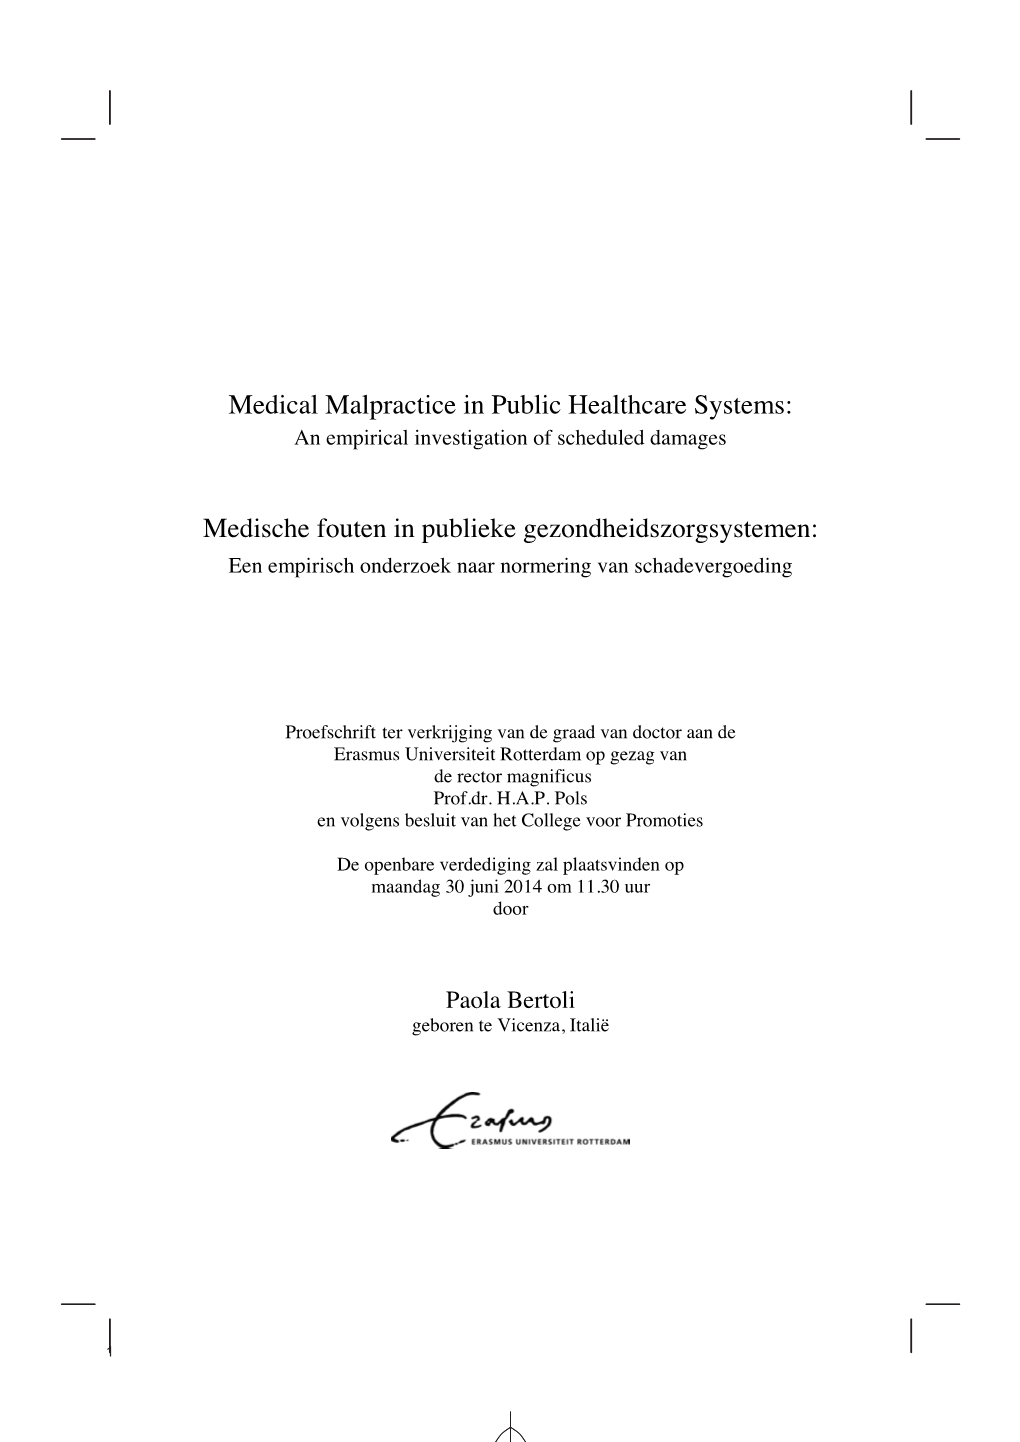 Medical Malpractice in Public Healthcare Systems: an Empirical Investigation of Scheduled Damages